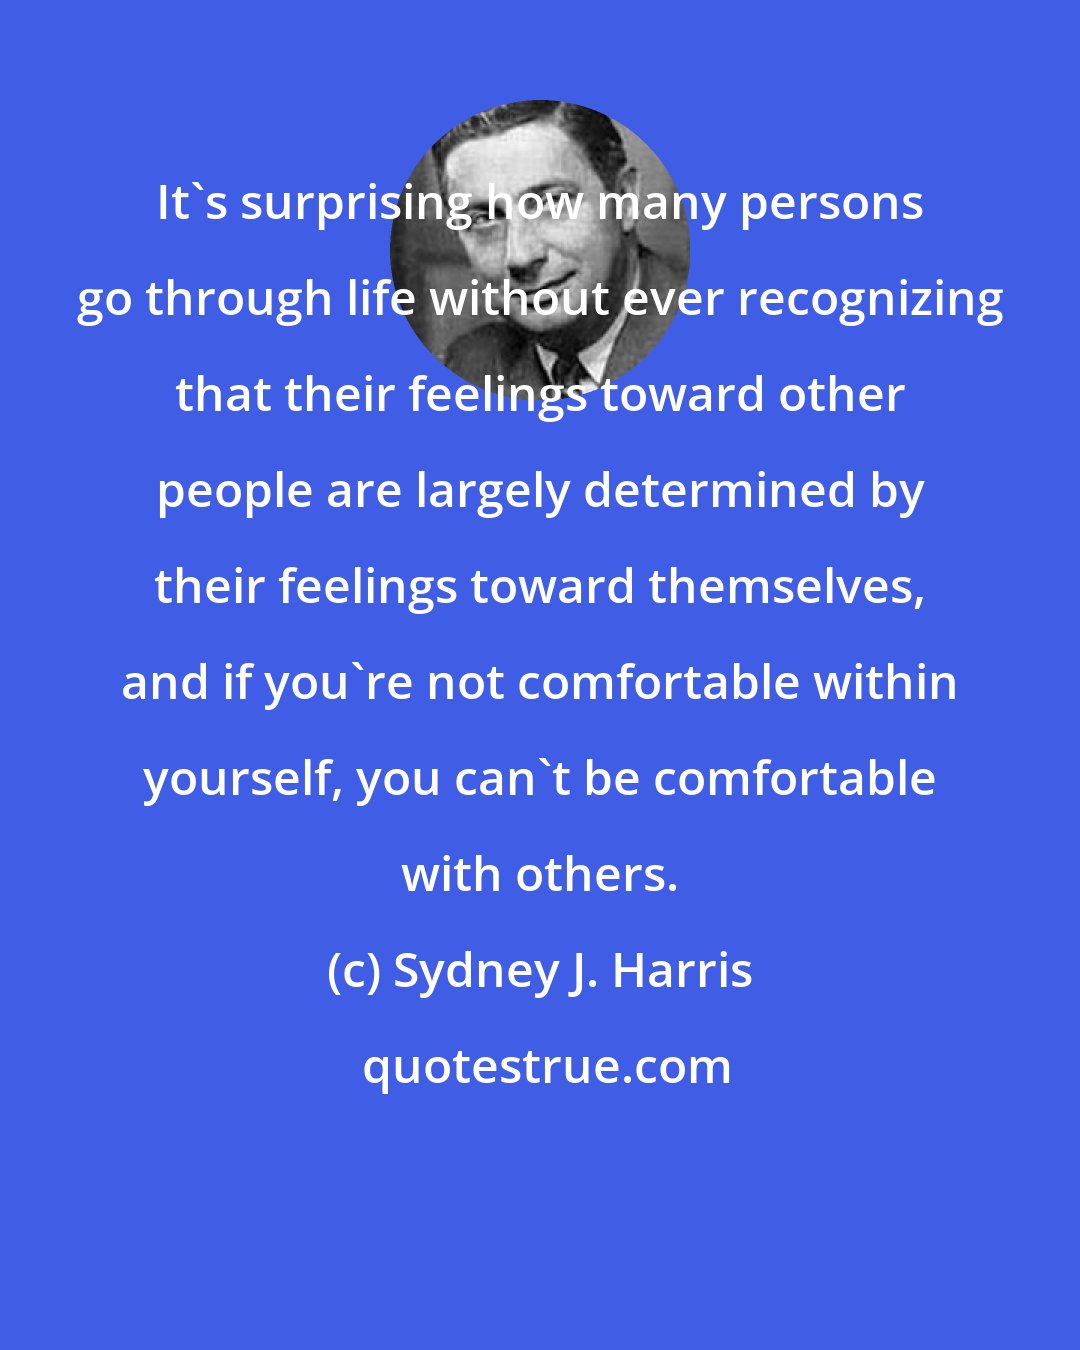 Sydney J. Harris: It's surprising how many persons go through life without ever recognizing that their feelings toward other people are largely determined by their feelings toward themselves, and if you're not comfortable within yourself, you can't be comfortable with others.